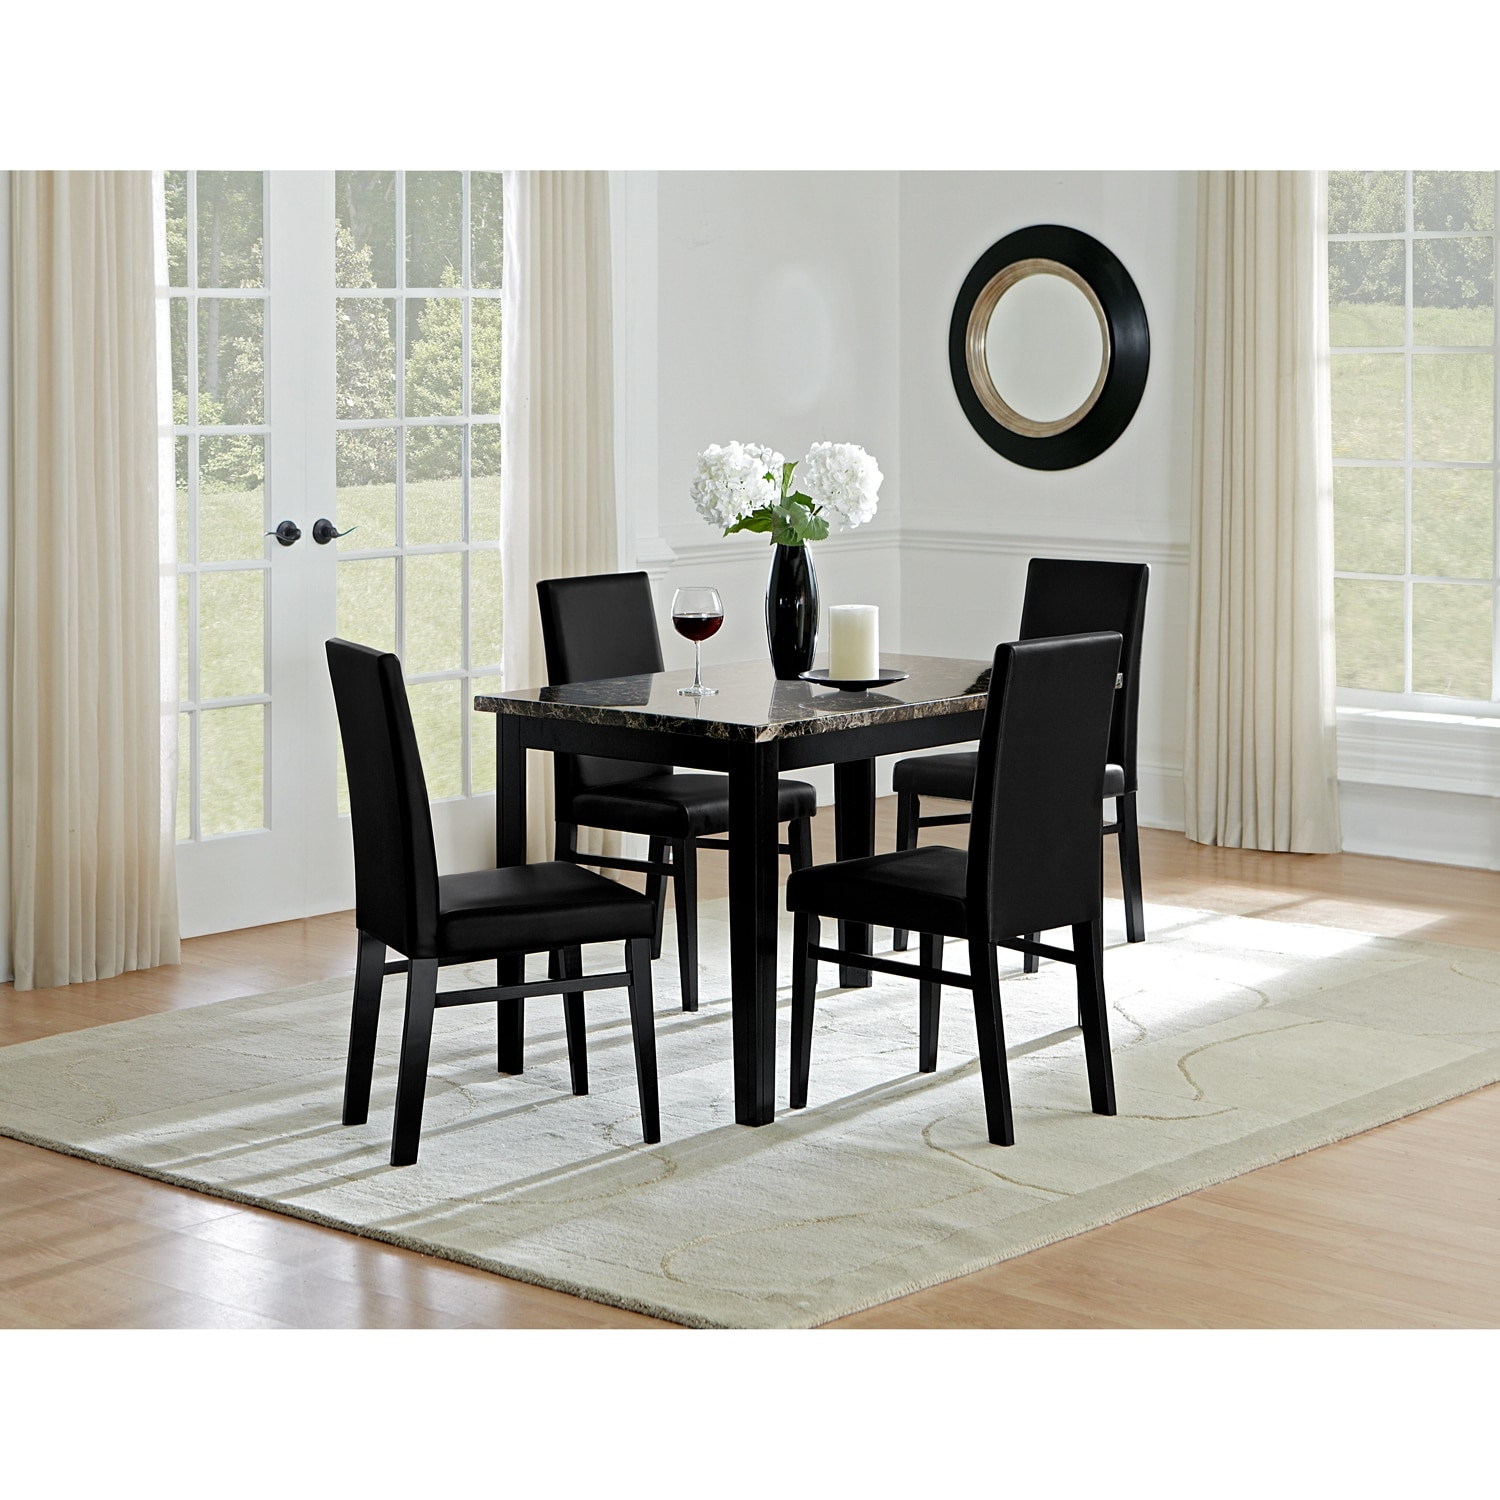 Shadow Table and 4 Chairs - Black | Value City Furniture